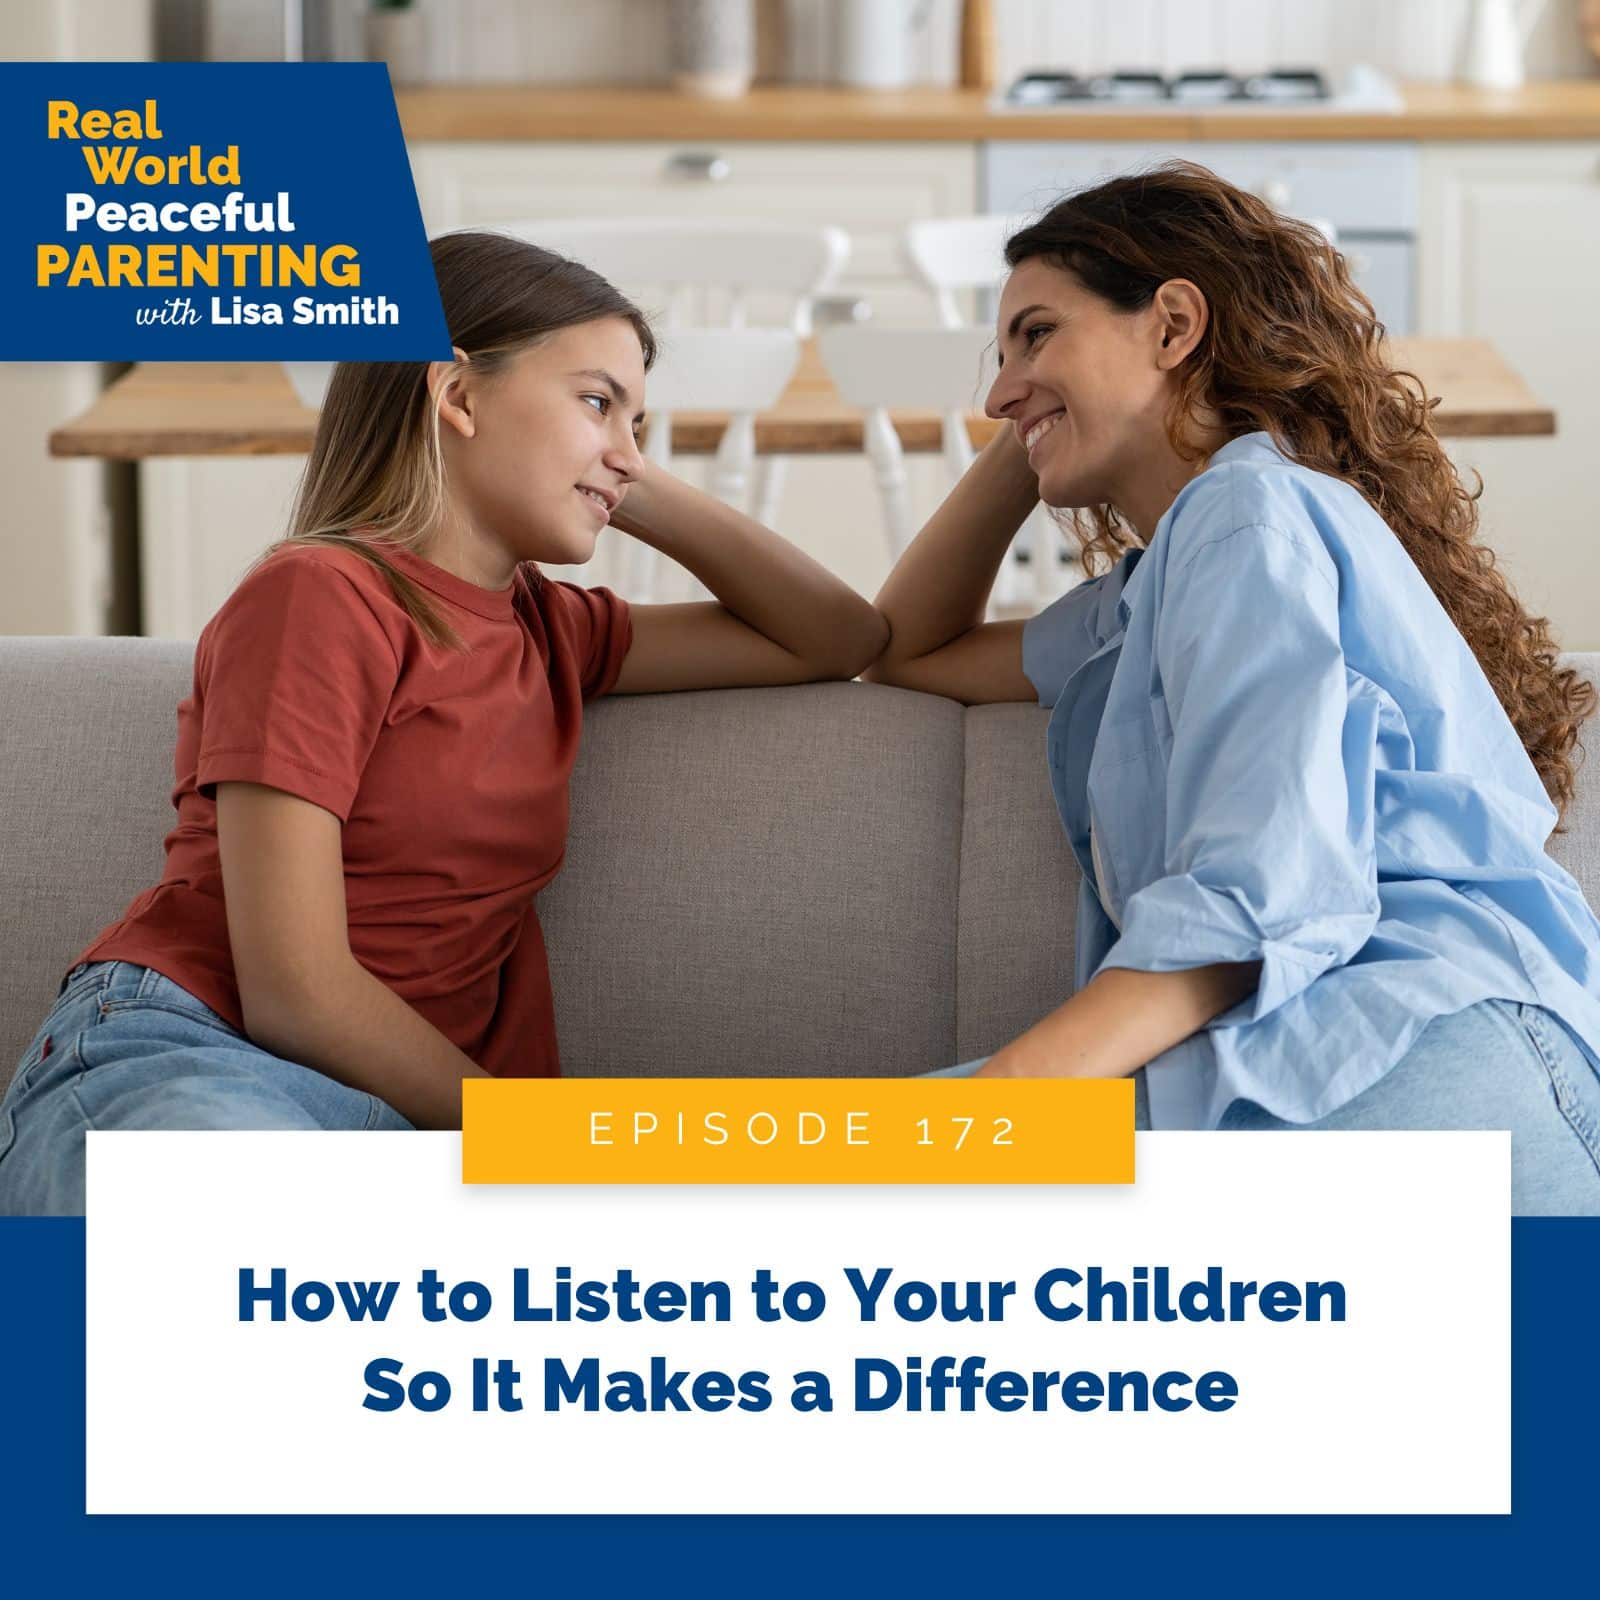 Real World Peaceful Parenting with Lisa Smith | How to Listen to Your Children So It Makes a Difference